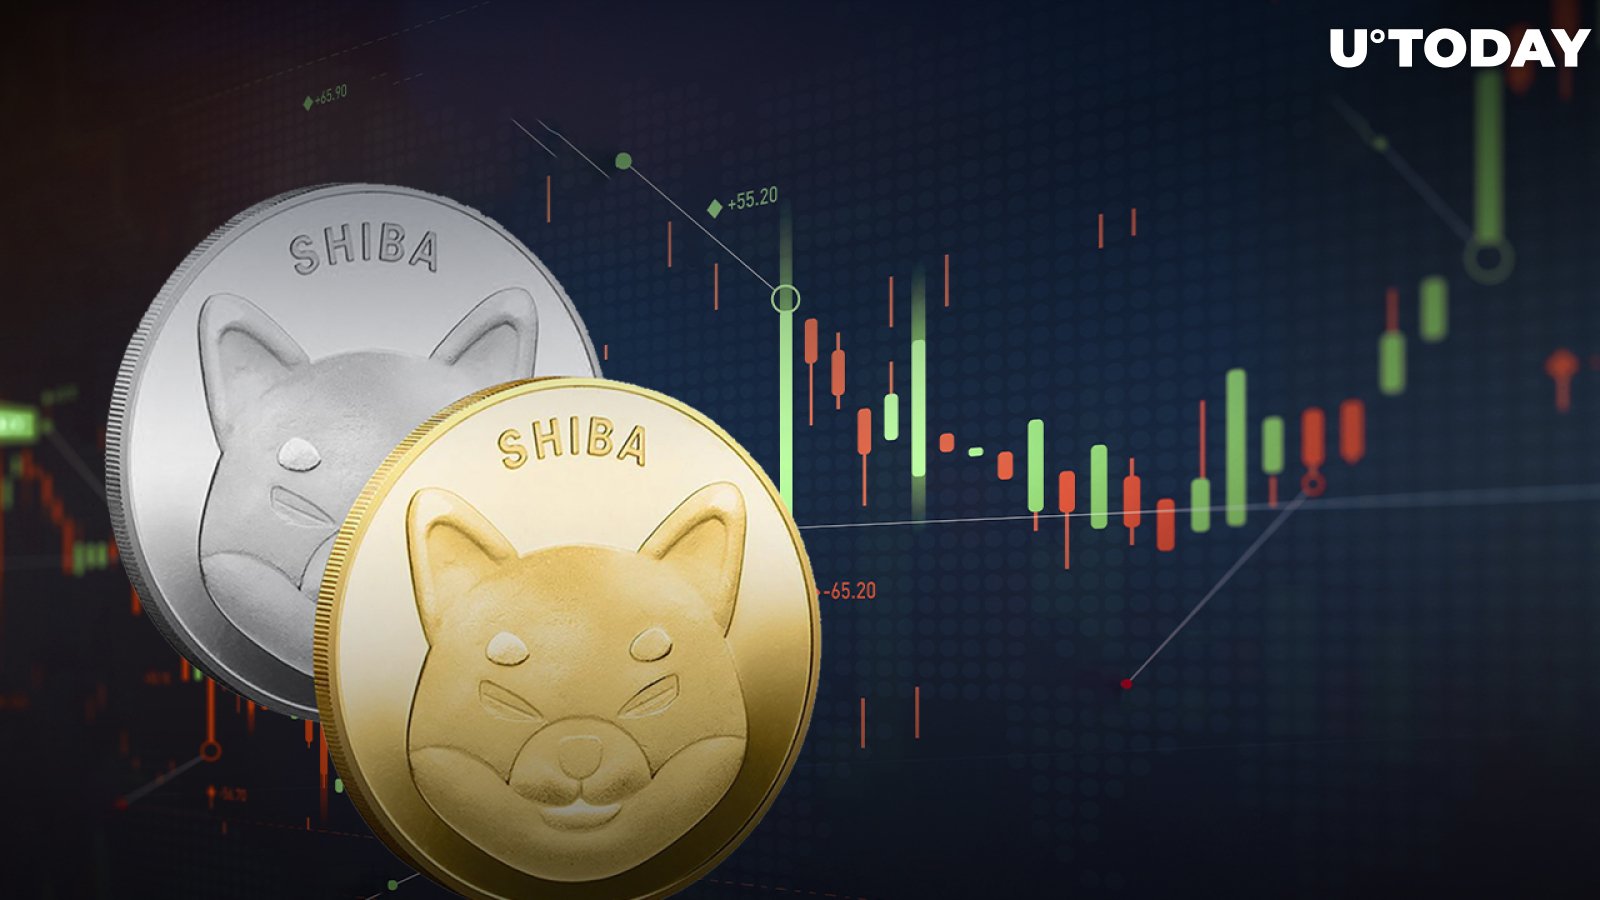 Shiba Inu (SHIB) Surges 45% in 7 Days & Overtakes Tron (TRX) in CoinMarketCap Top